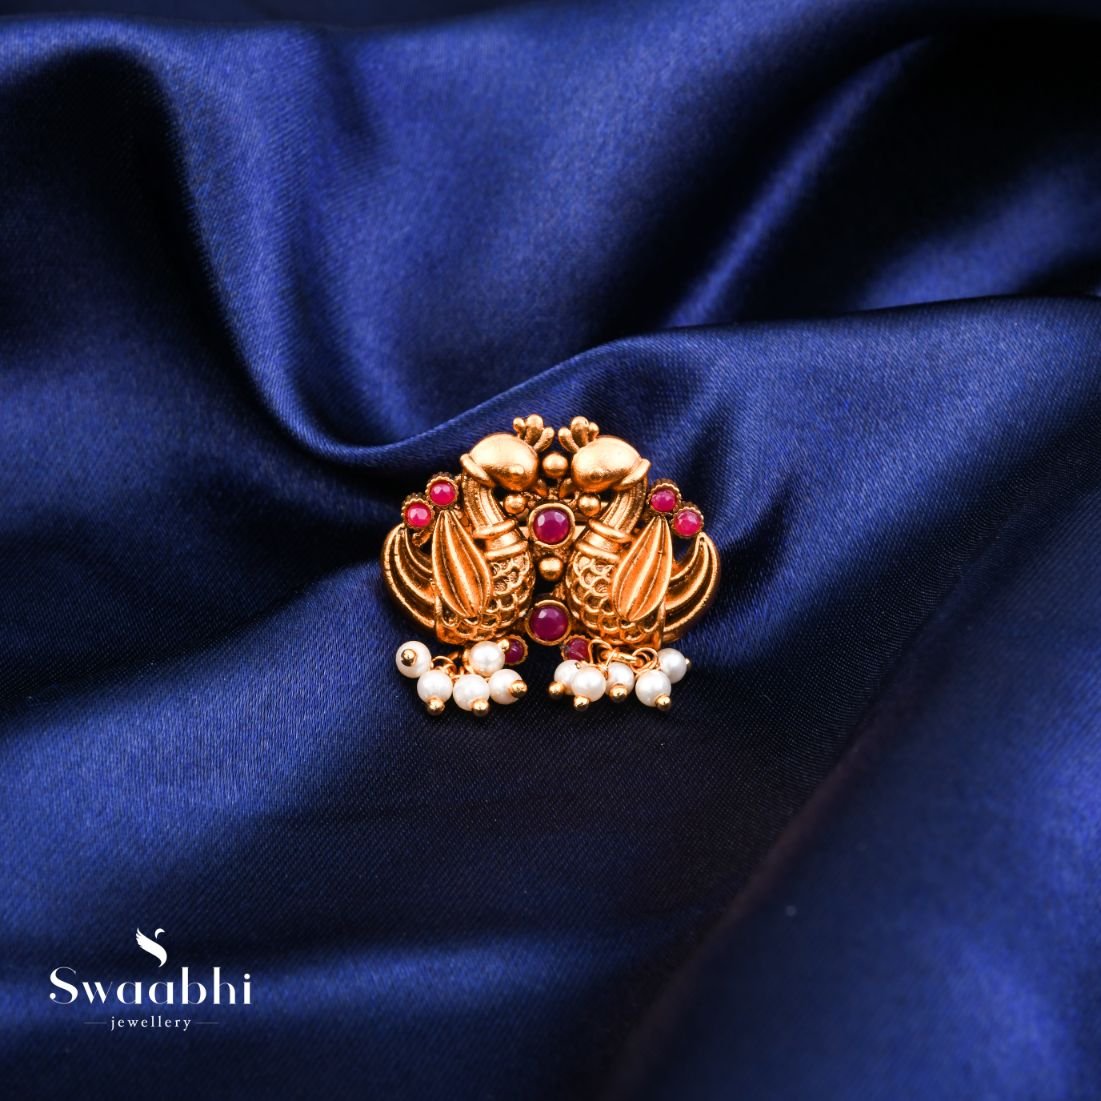 Buy Peacock Pearl Temple Ring Best Designs for girls | Swaabhi.com